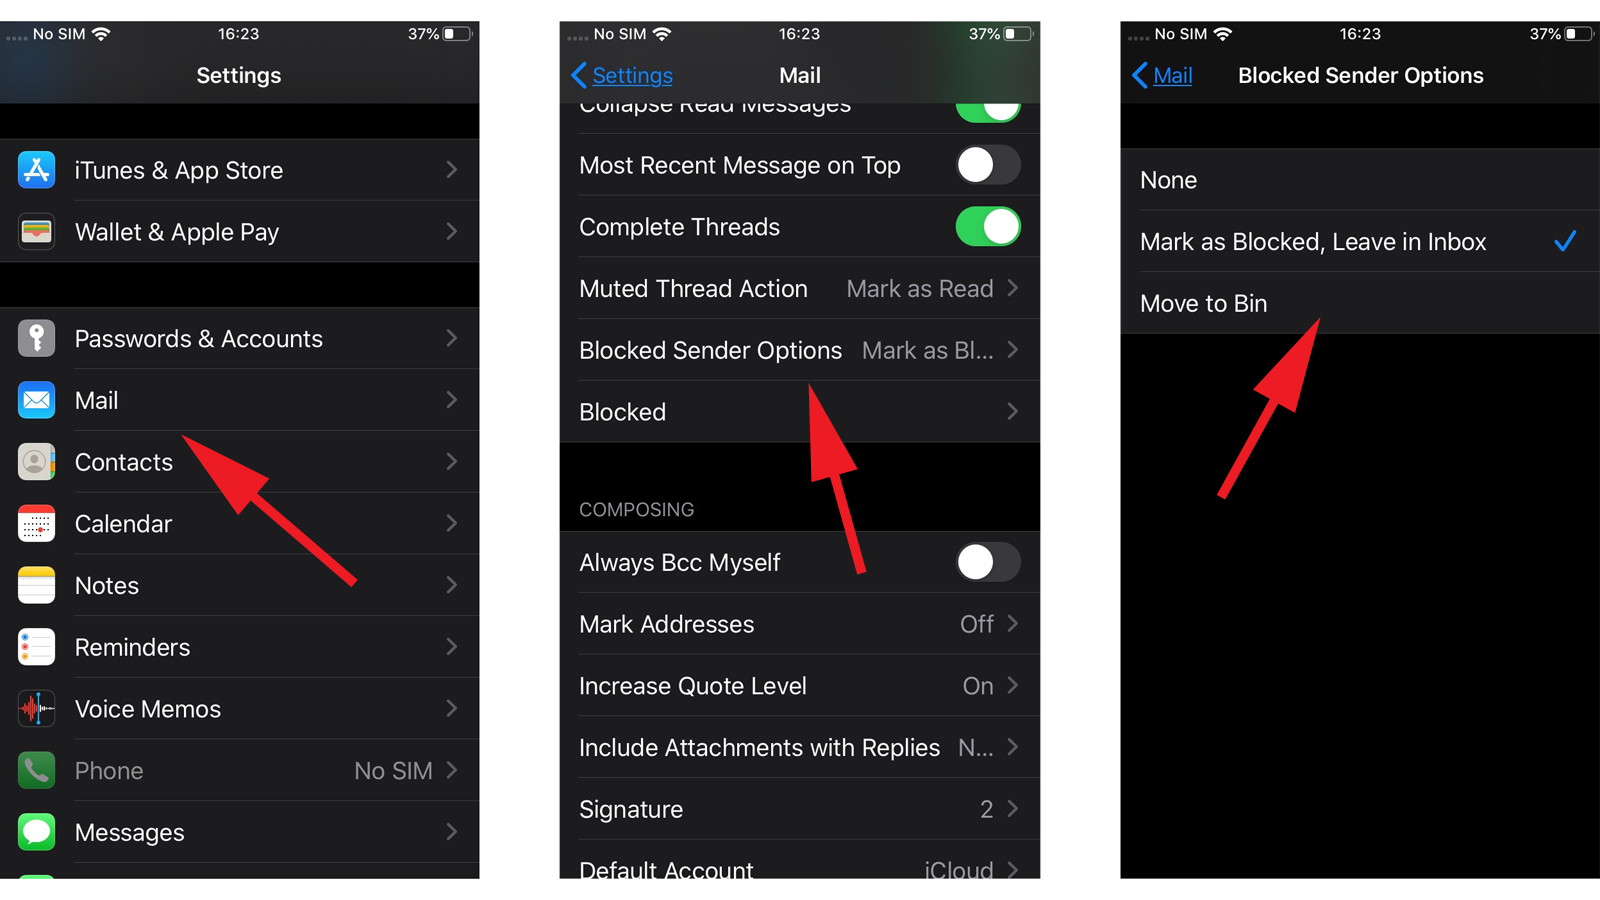 How to Clean Junk Mail on Iphone?